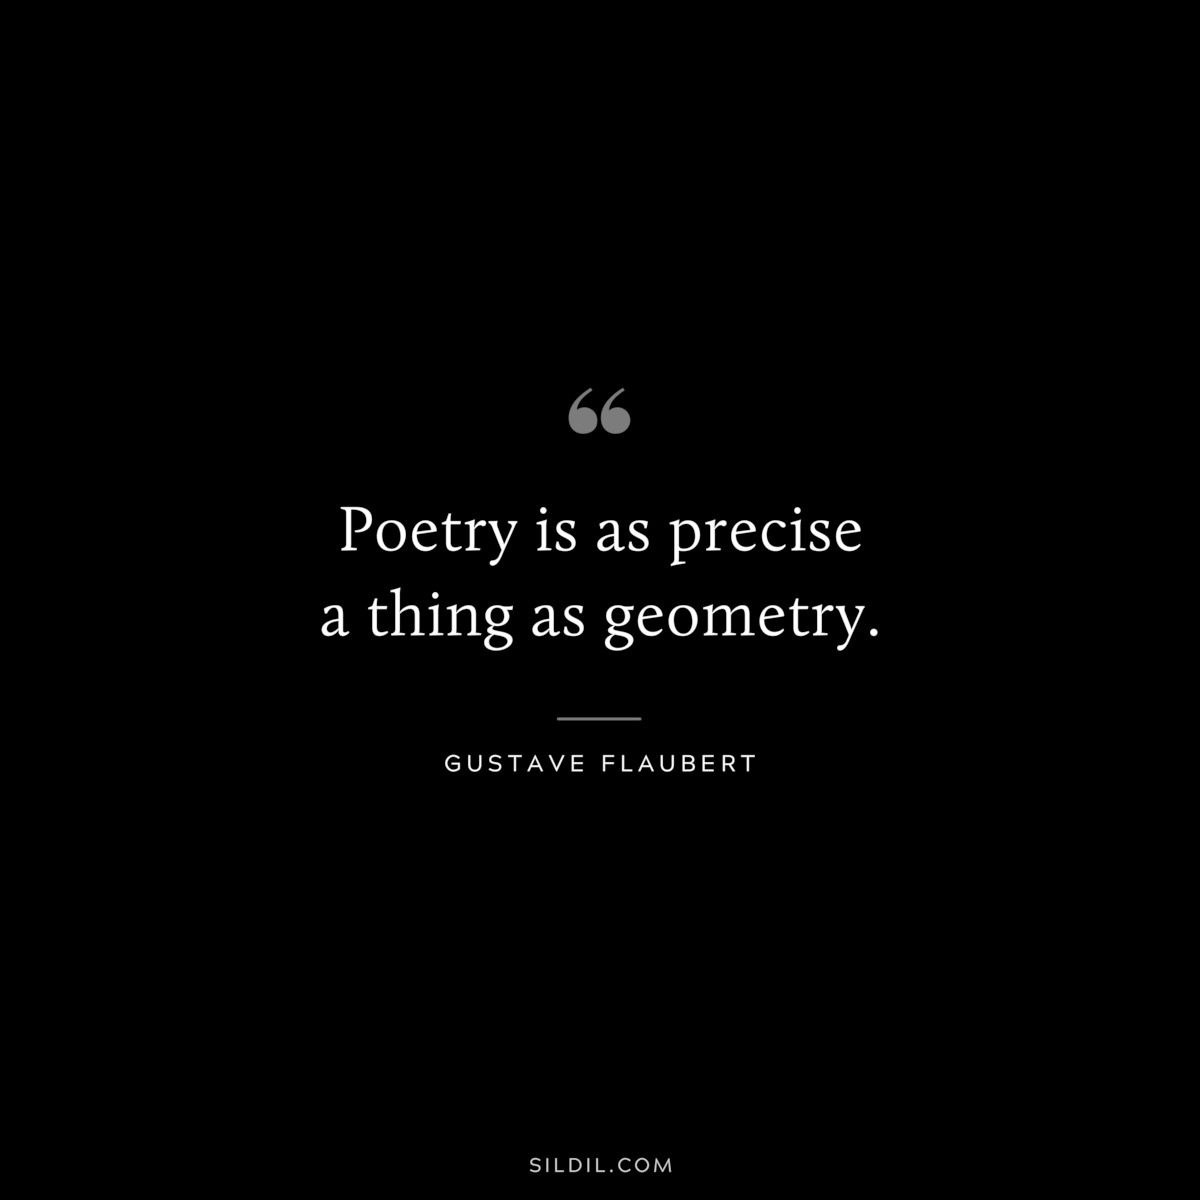 Poetry is as precise a thing as geometry. ― Gustave Flaubert